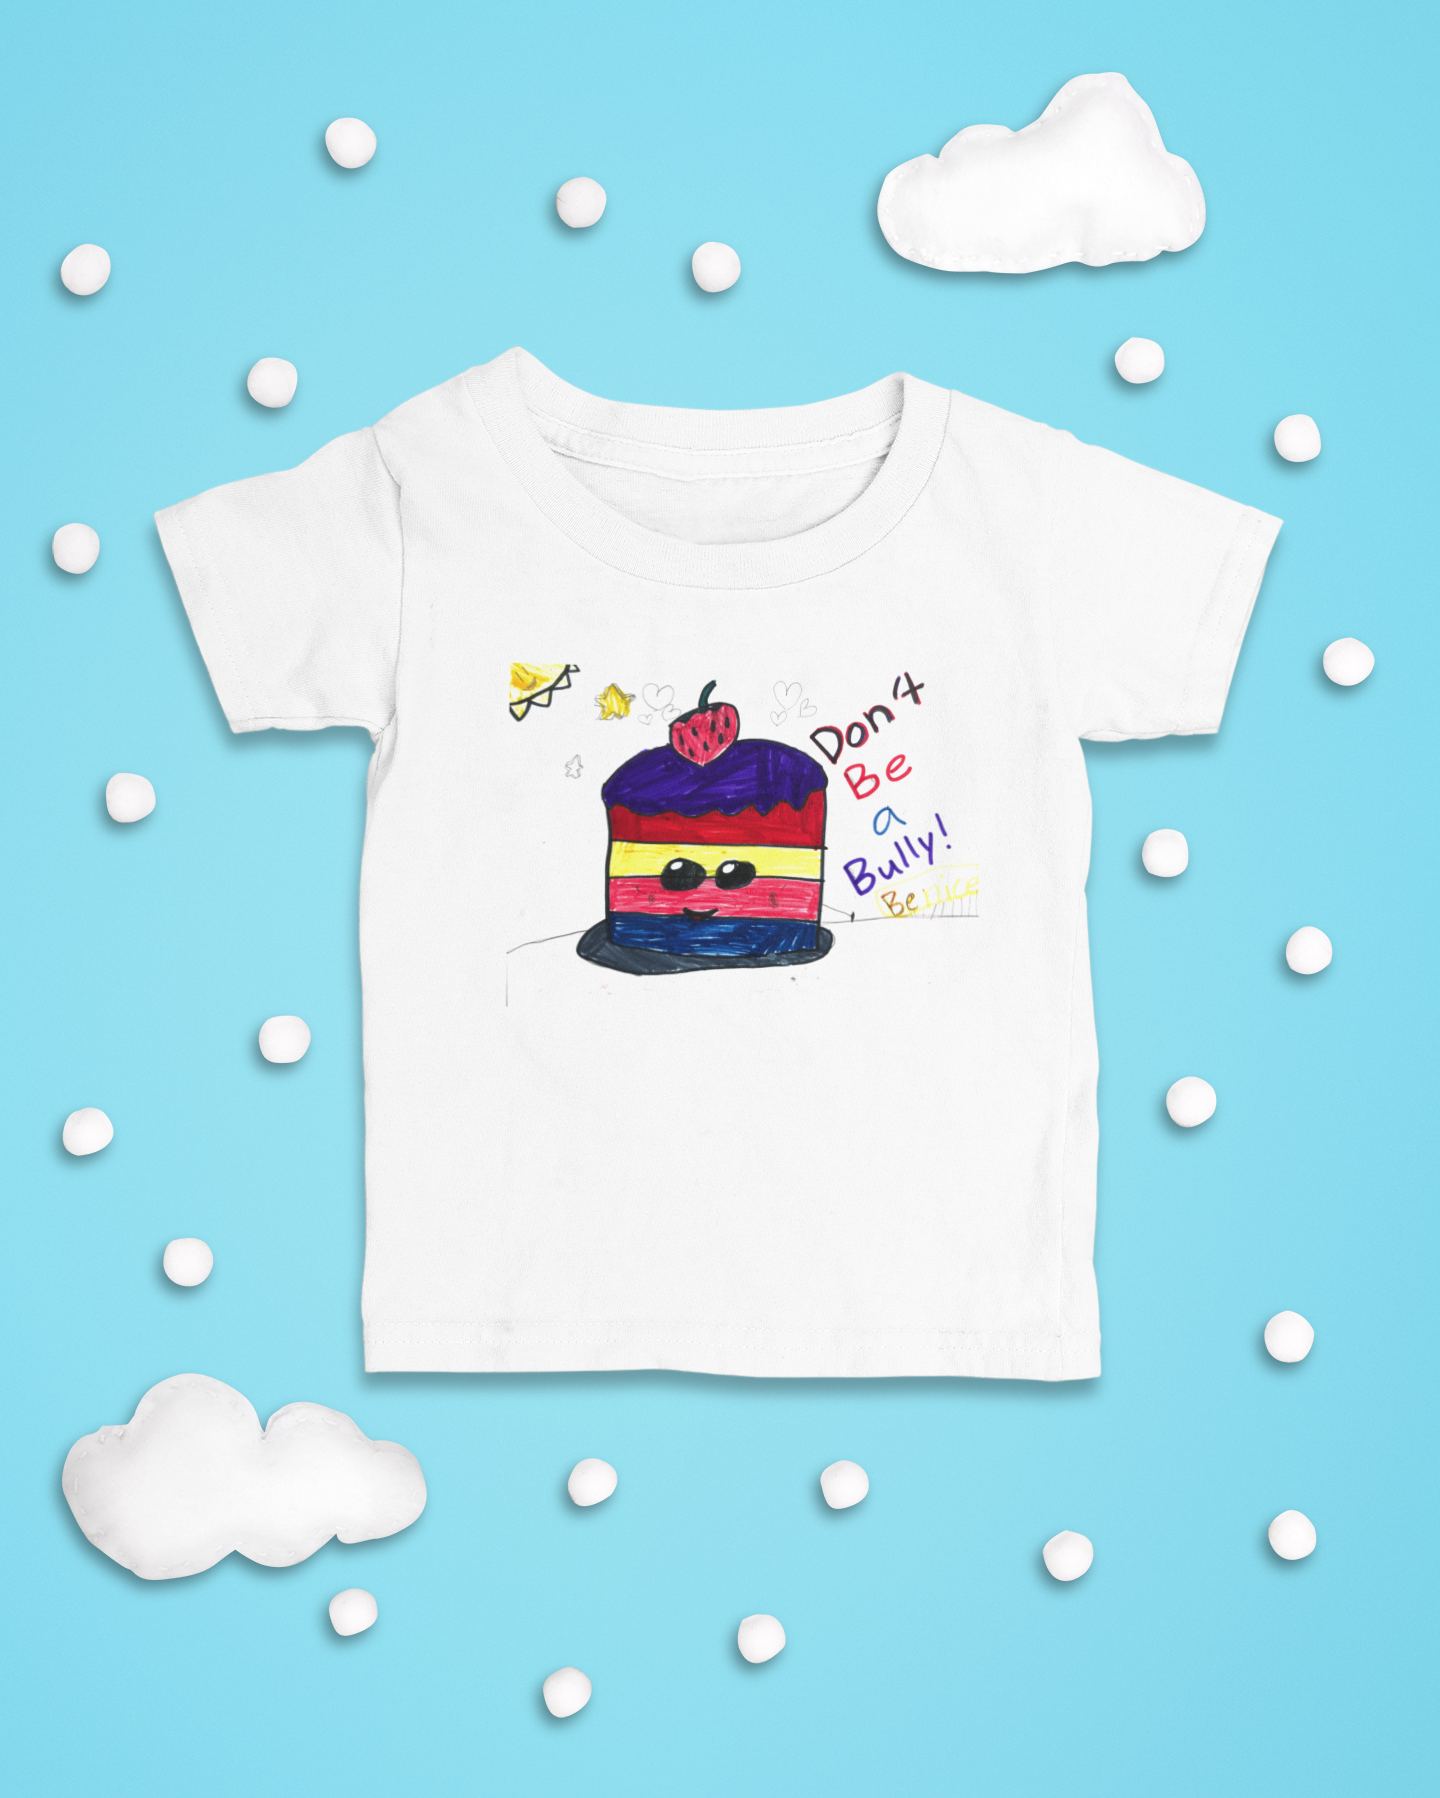 Don't Be A Bully Cake Shirt